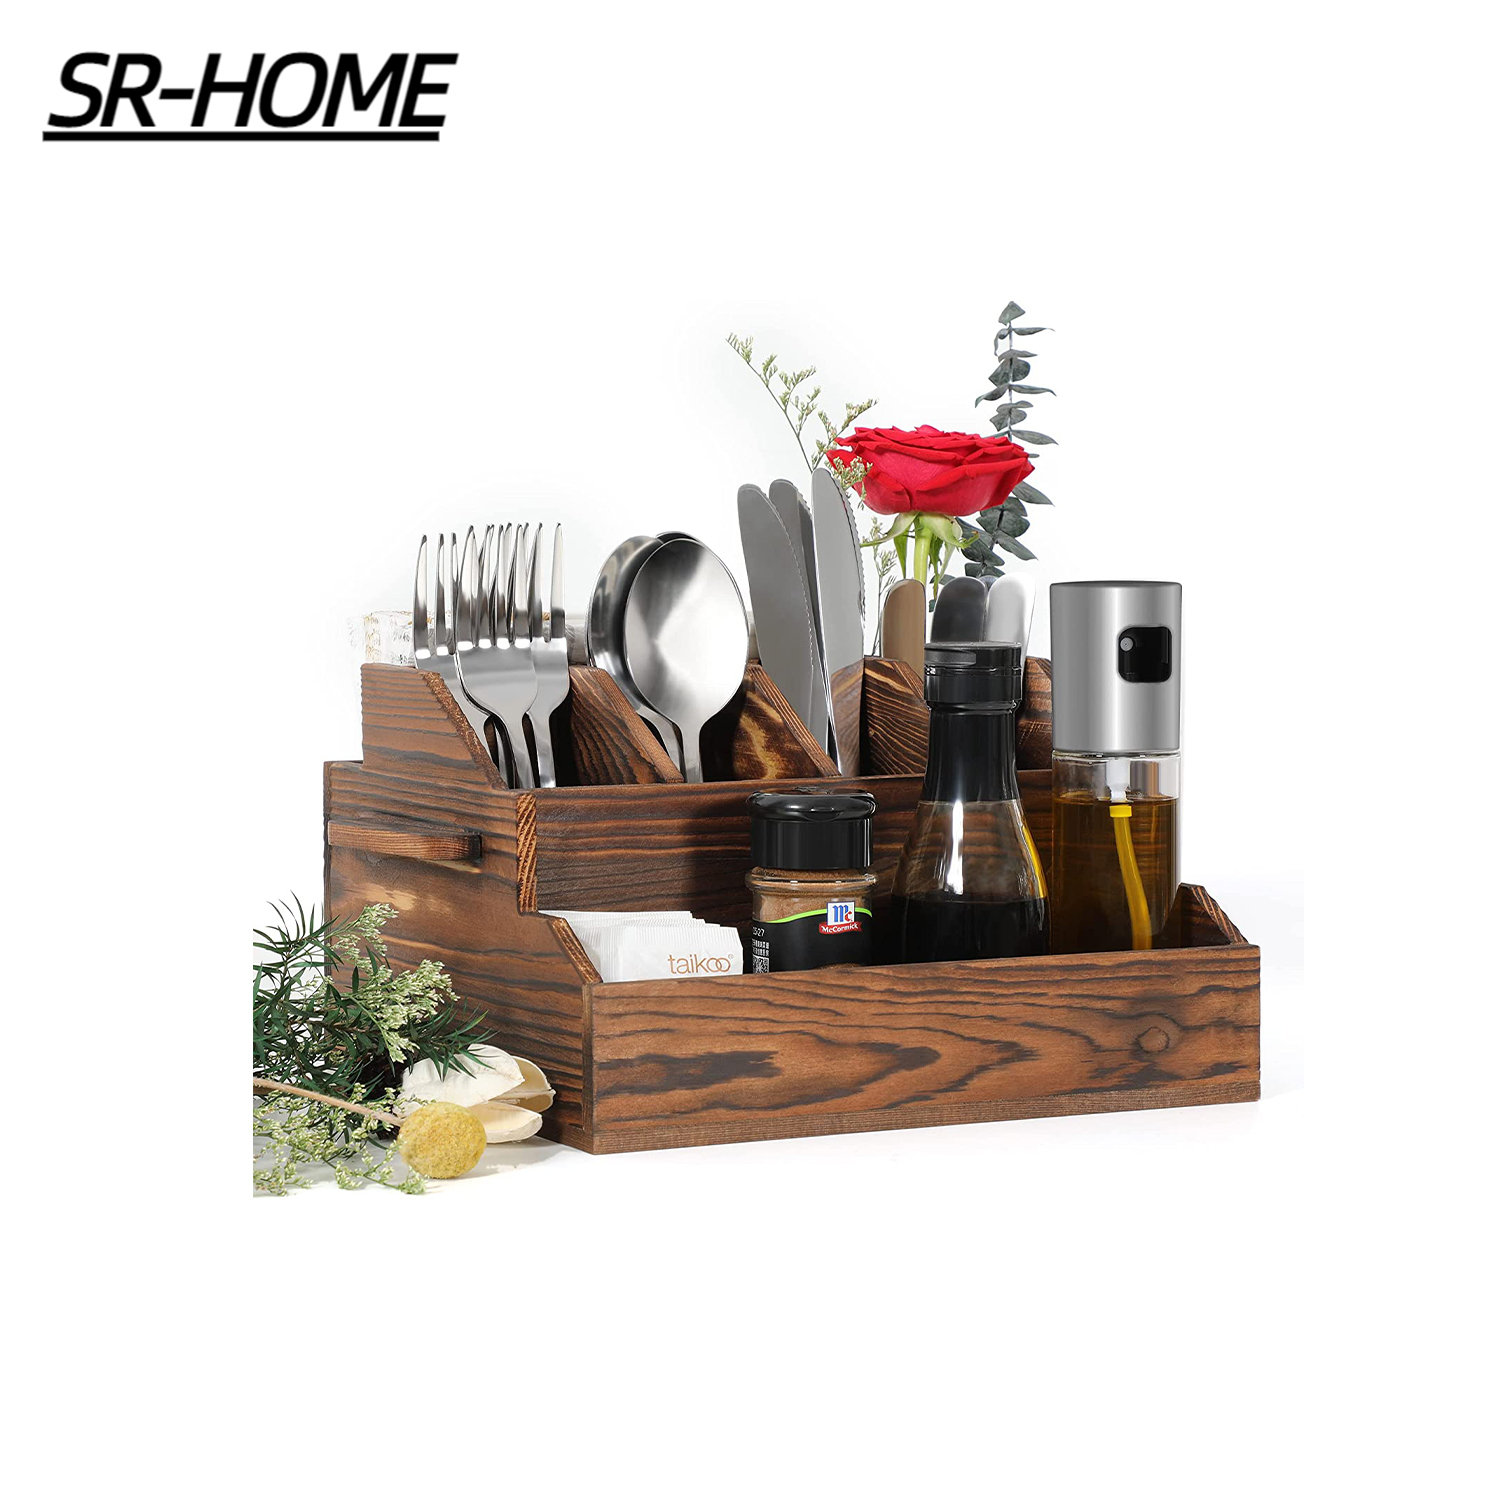 SR-HOME Silverware Organizer With Lid For Drawer, Plastic Utensil Holder  For Countertop, Flatware Storage Cutlery Tray With Cover 5 Compartments